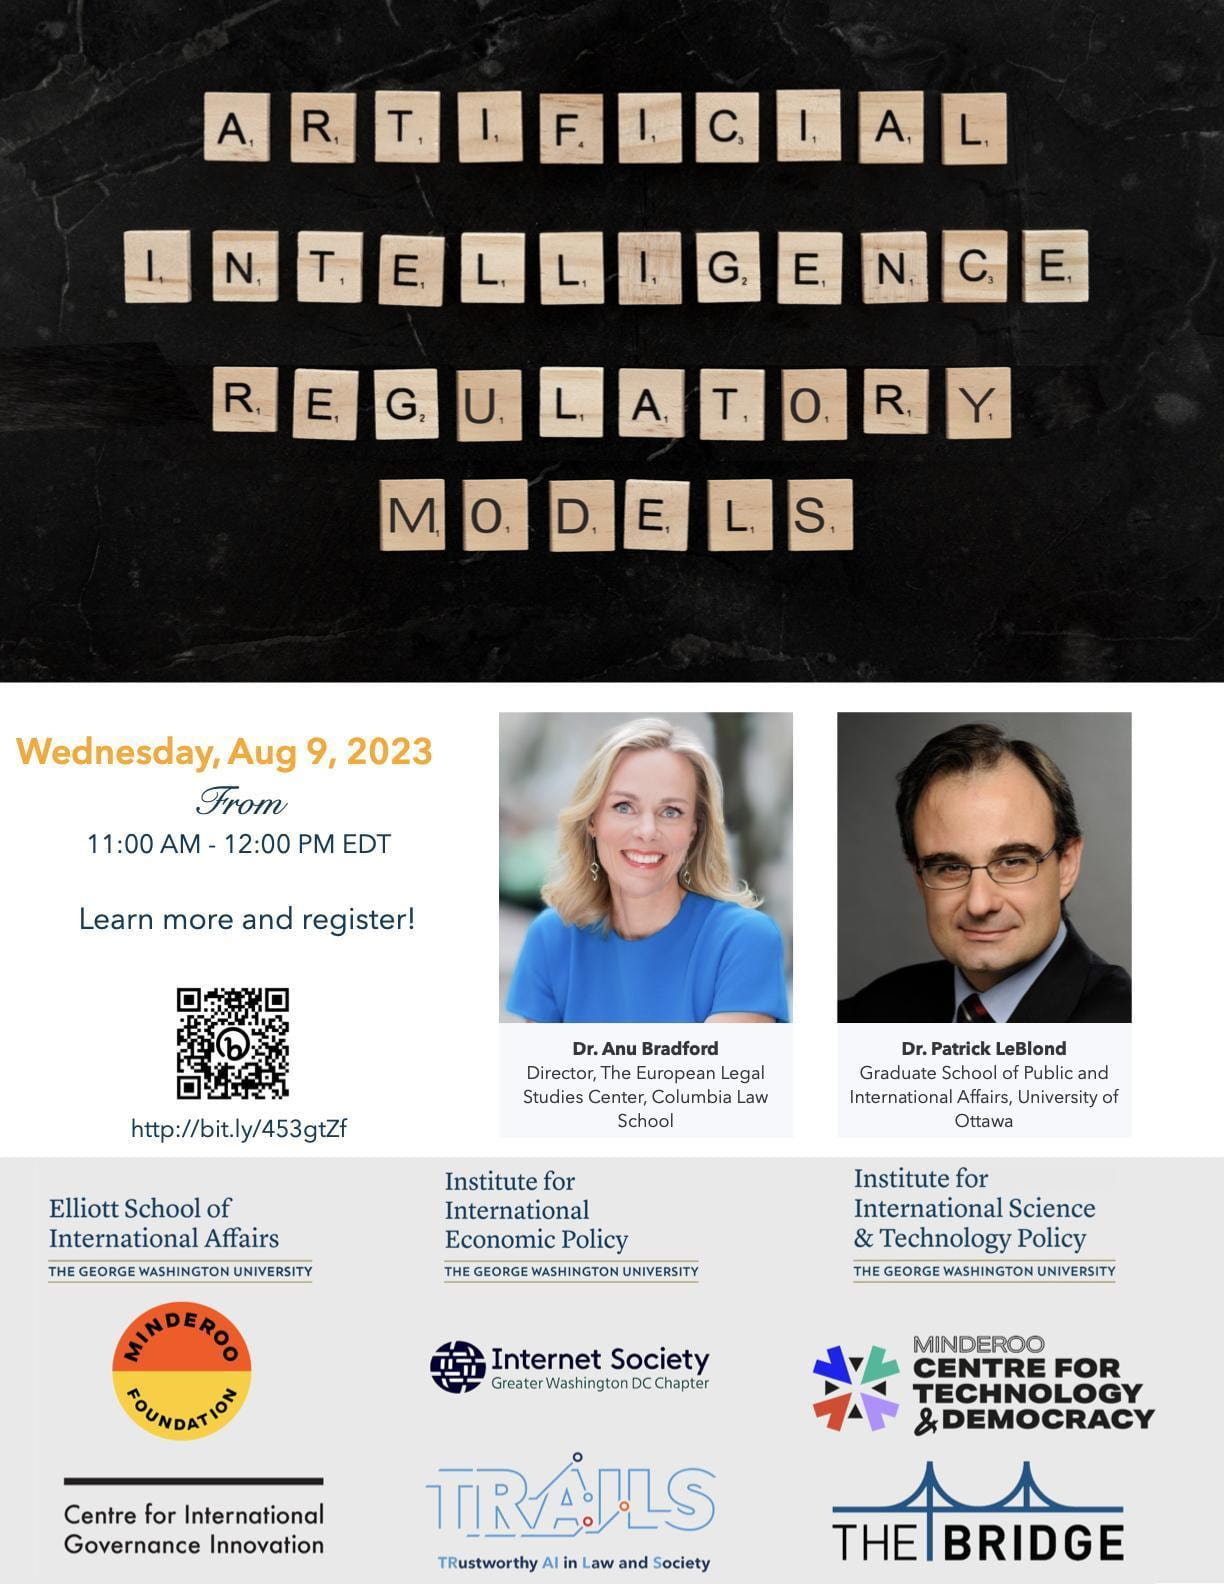 Event Flyer: Artificial Intelligence Regulatory Models, Wednesday August 9, 2023 11AM-12PM EDT featuring Dr. Anu Bradford, Director, The European Legal Studies Center, Columbia Law School, Dr. Patrick LeBlond, Graduate School of Public and International Affairs, University of Ottawa, Sponsored by George Washington University's Elliott School of International Affairs, Institute for International Economic Policy, and Institute for International Science and Technology Policy as well as the Minderoo Foundation Centre for International Governance Innovation and Centre for Technology and Democracy, Internet Society Washington, DC chapter, Trails Trustworthy AI in Law and Society, and the Bridge.